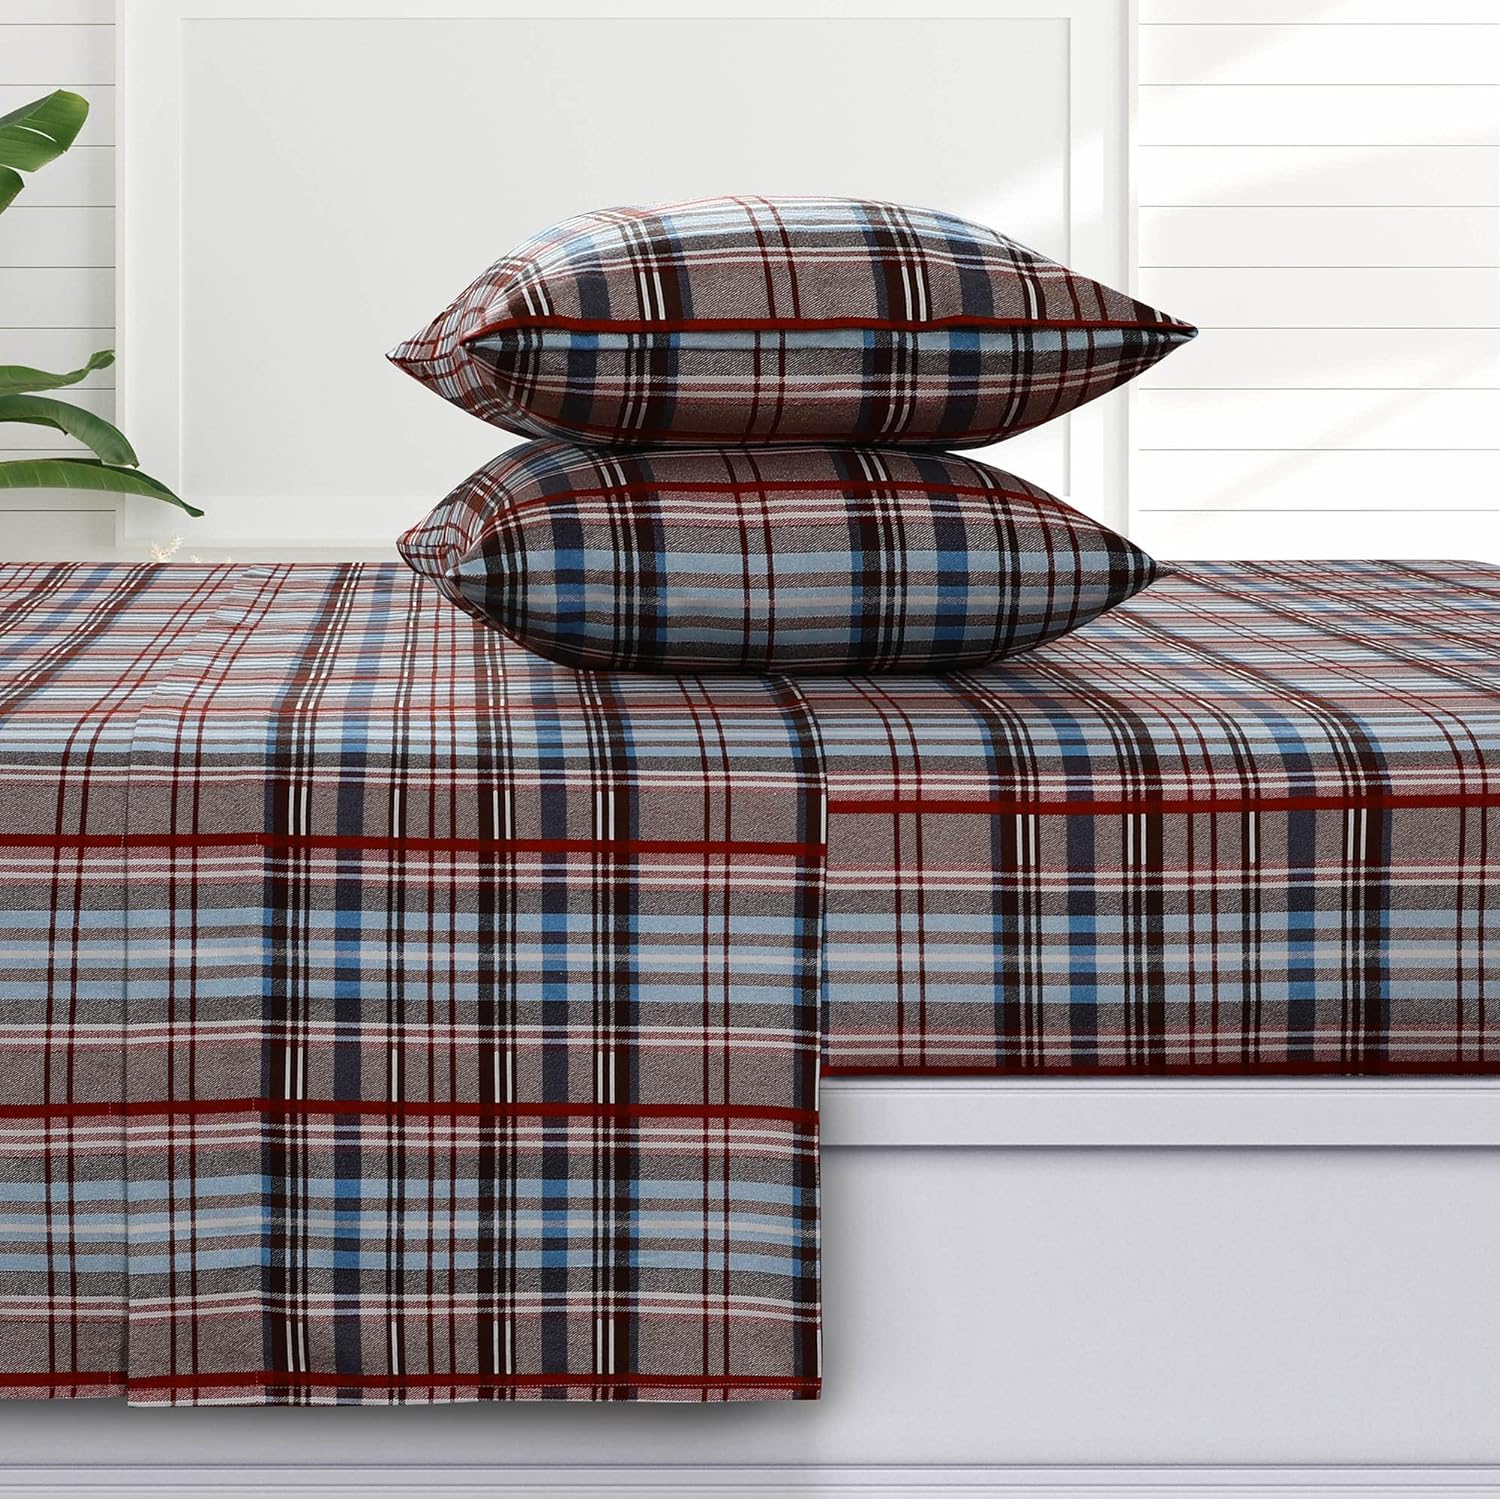 Tribeca Living Brentwood Plaid 170-GSM Flannel Extra Deep Pocket Sheet Set with Oversized Flat, 100% Cotton, Super Soft, Warm, Cozy Bed Sheet,3 pcs, Queen Brown, (BRPLFLOSHEQU)